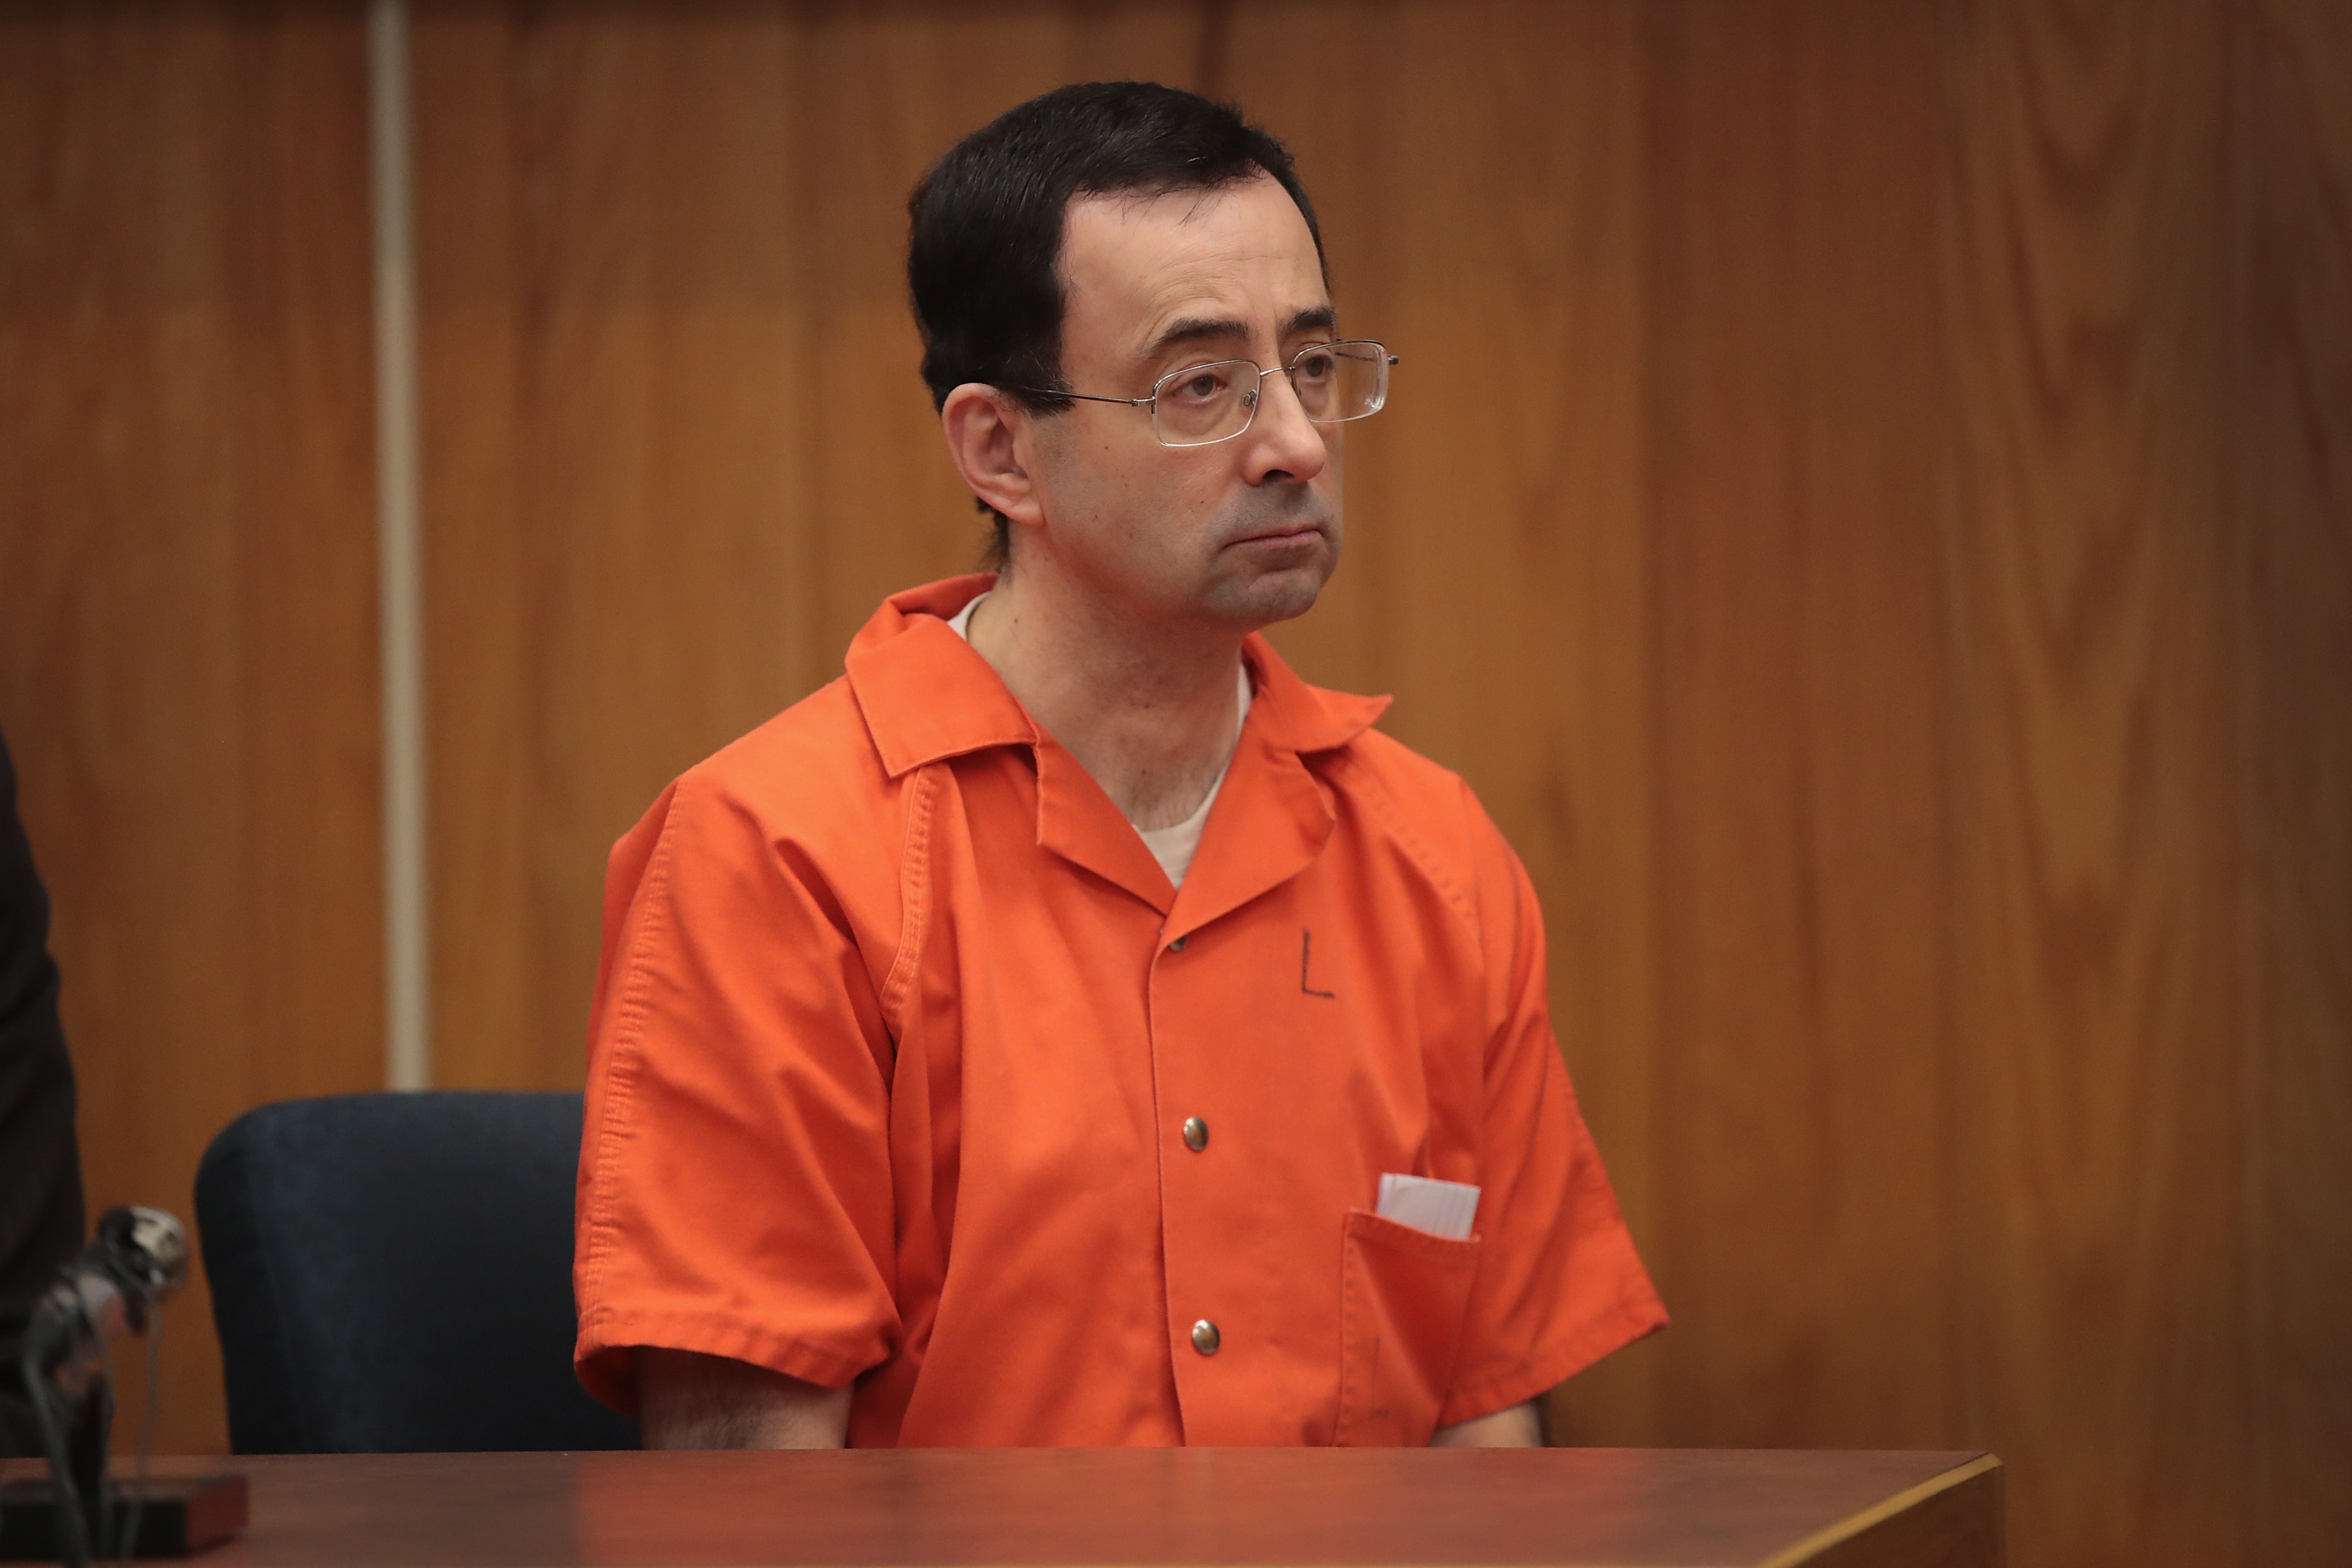 Larry Nassar sits in court listening to statements before being sentenced by Judge Janice Cunningham for three counts of criminal sexual assault in Eaton County Circuit Court on Feb. 5, 2018 in Charlotte, Michigan. (Scott Olson/Getty Images)